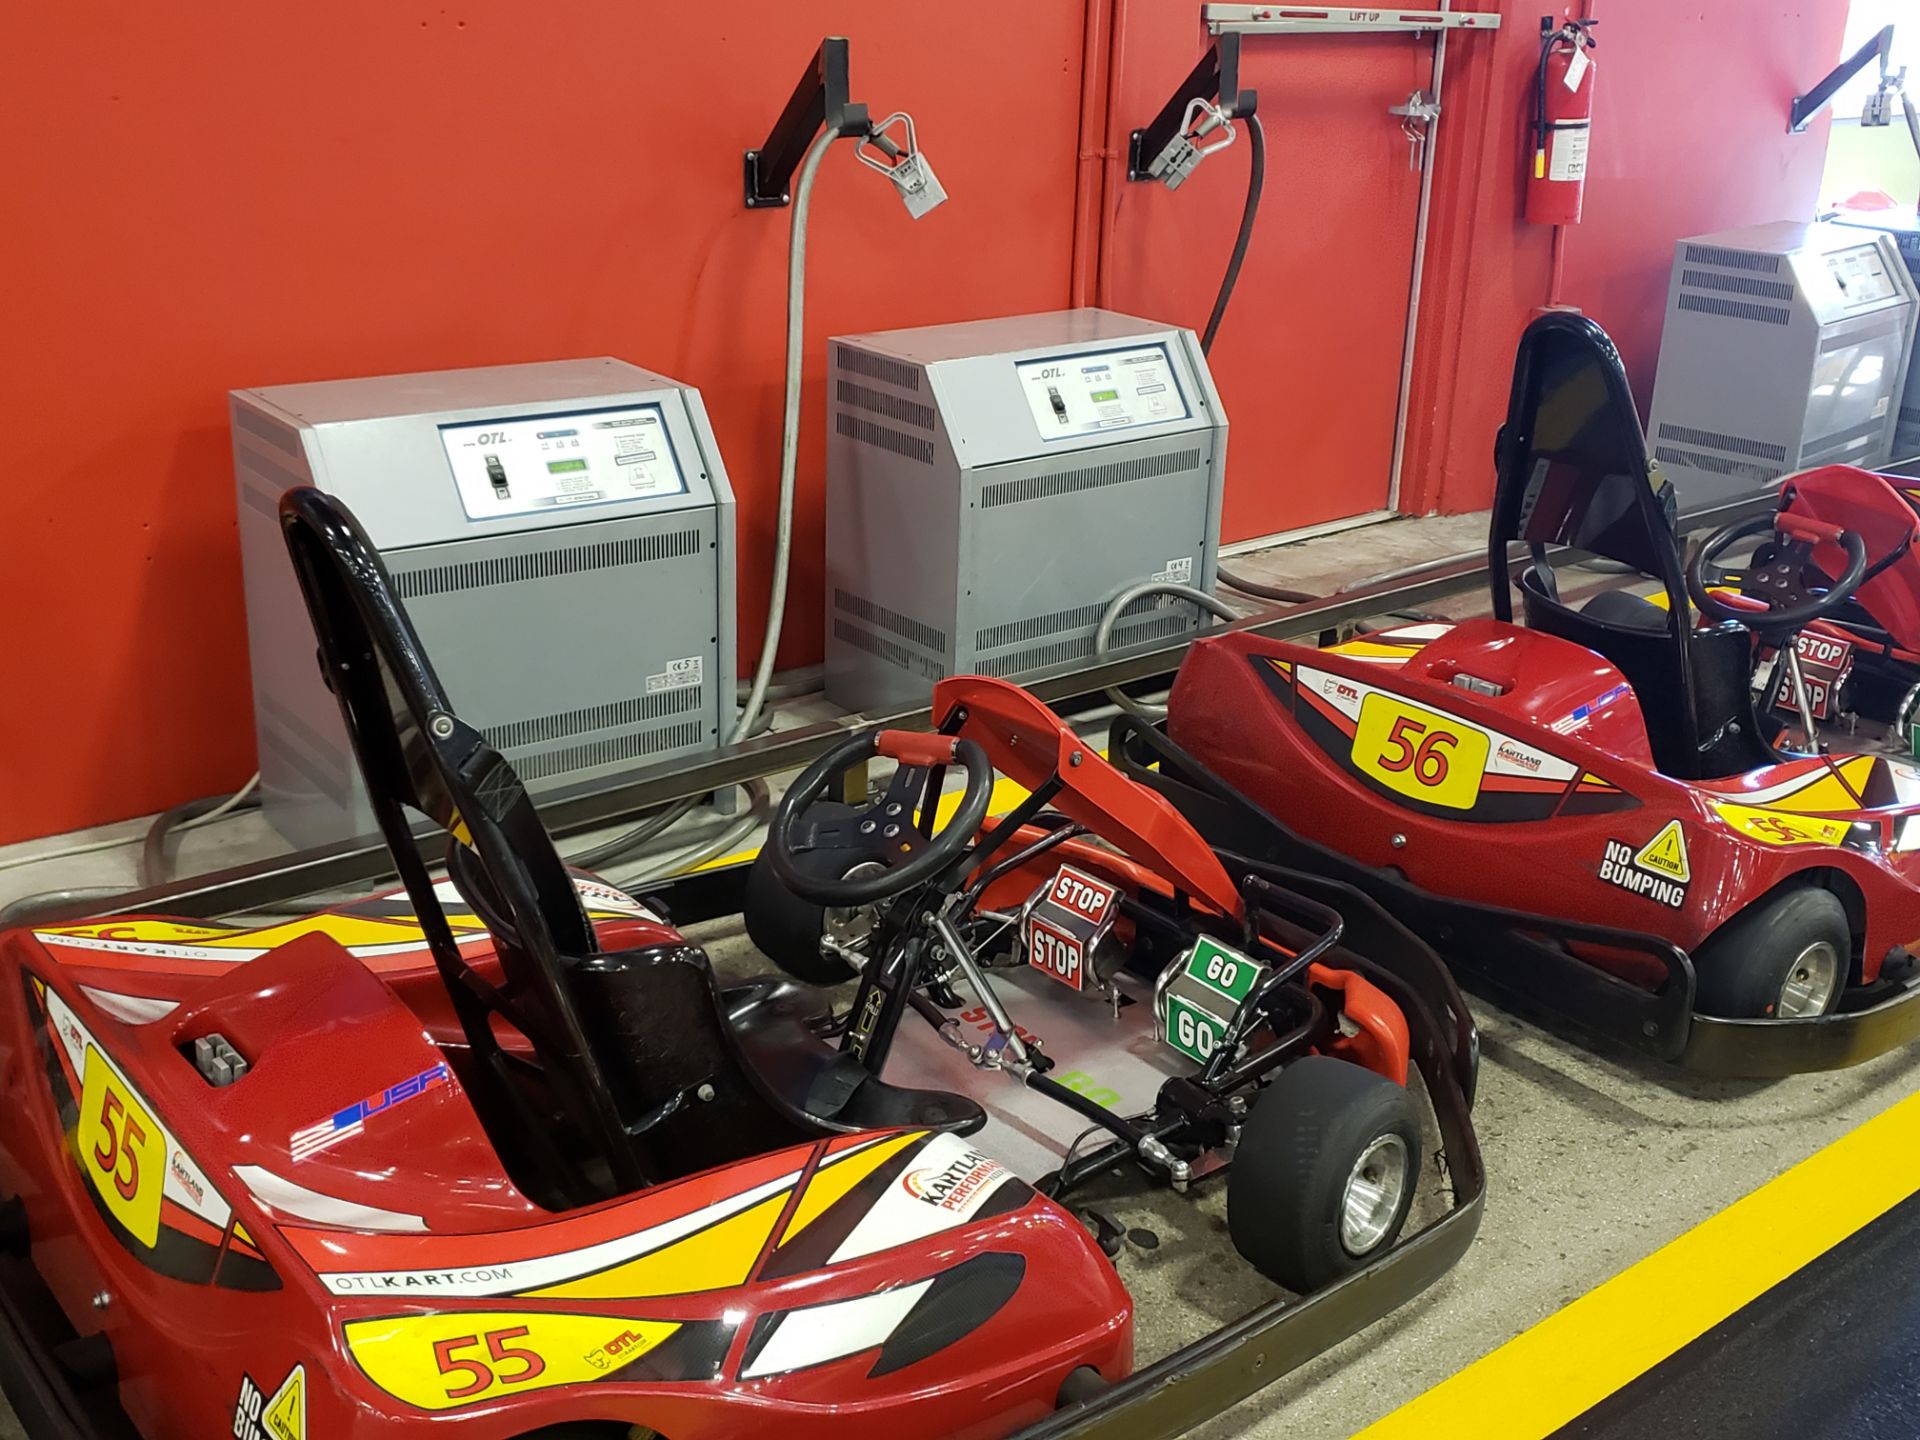 Every Go-Kart & Battery Charger in the auction, 49 Go-Karts in total. 37 OTL Storm Electric Go-Karts - Image 5 of 6